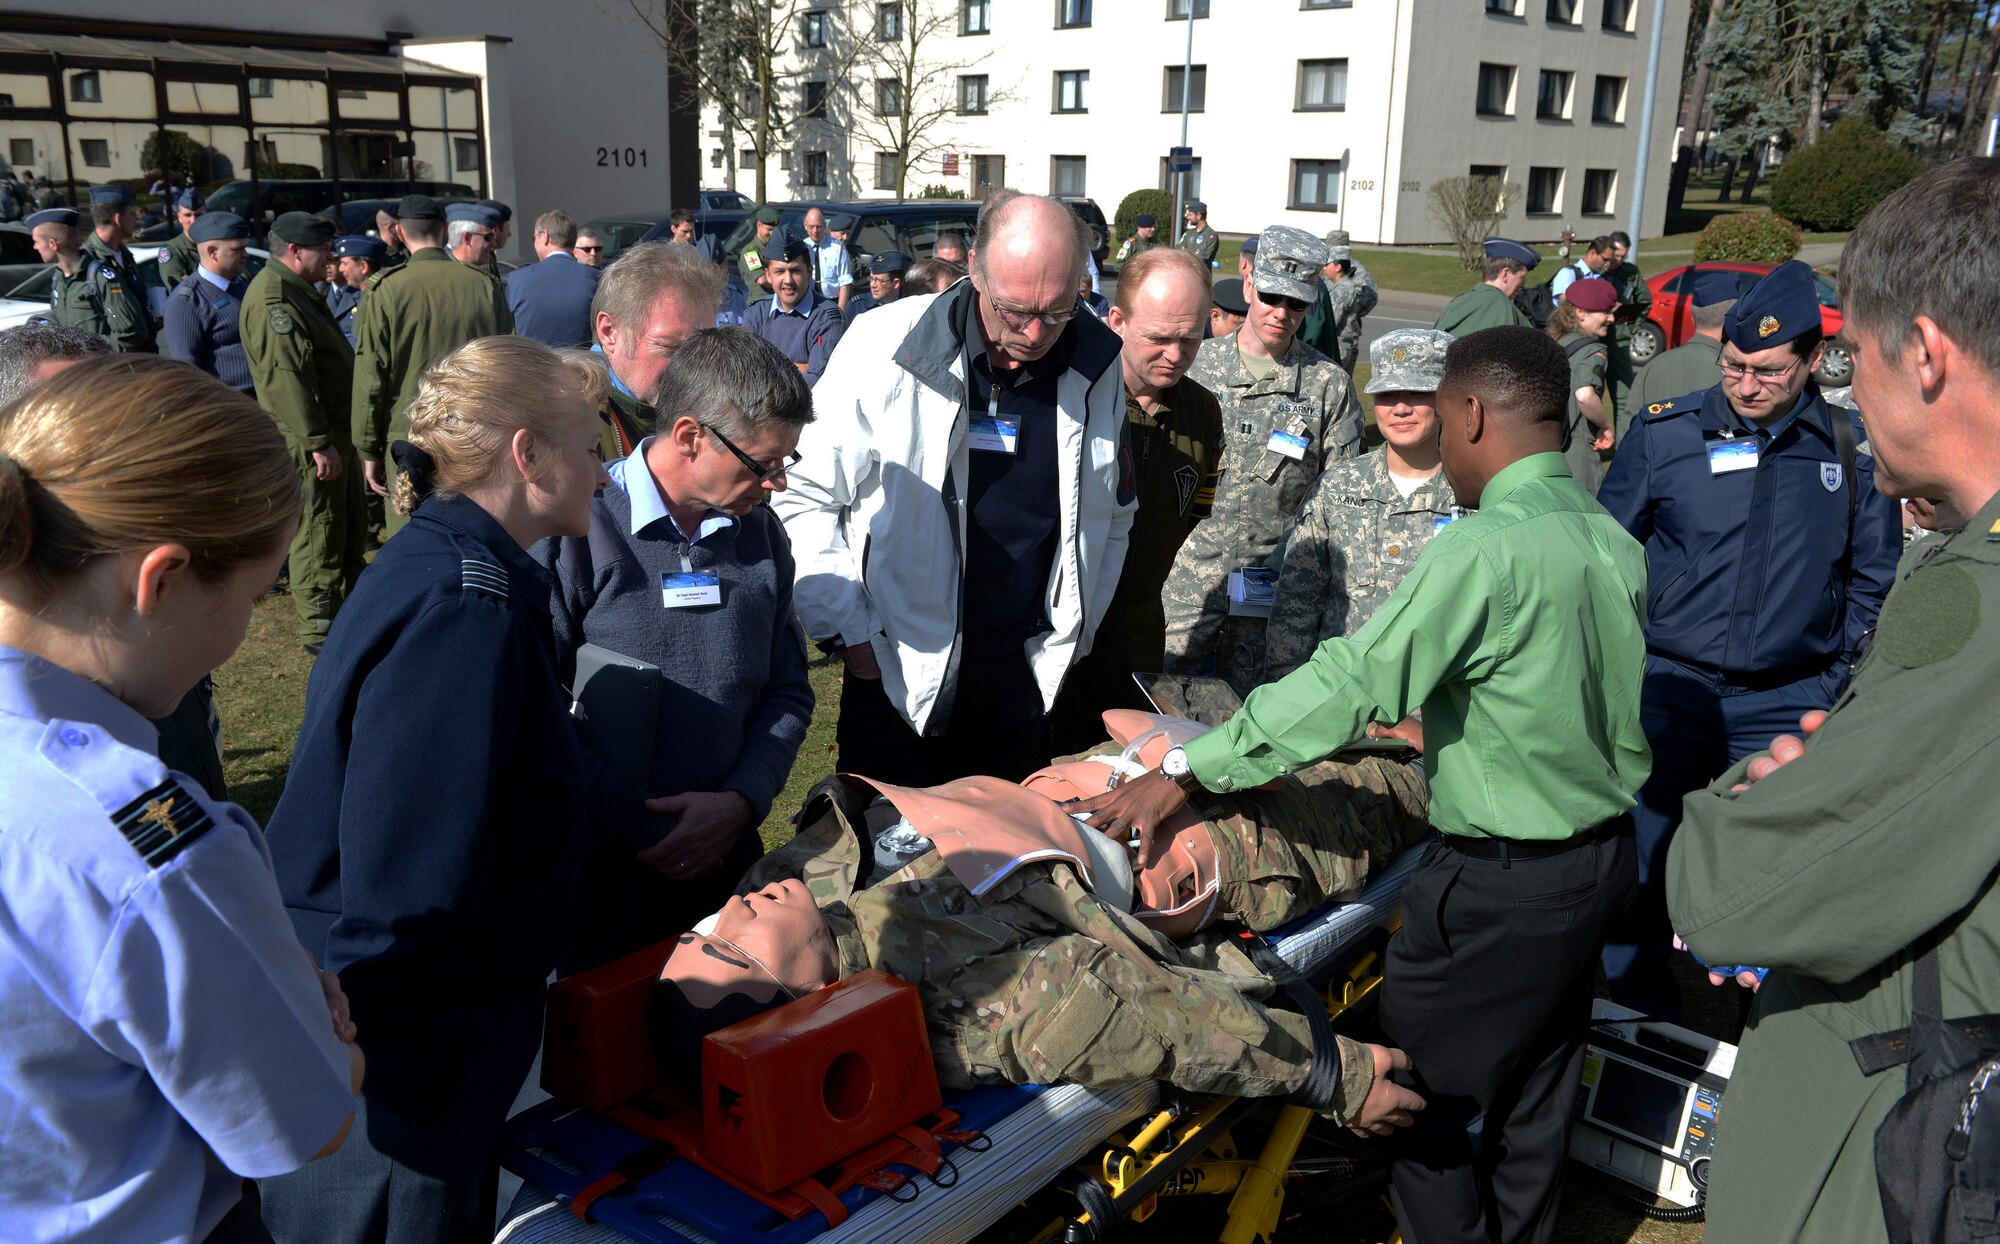 RAMSTEIN AIR BASE, Germany -- Christopher Williams, 86th Medical Group simulator operator, demonstrates how human simulators are used to enhance medical training while medical professionals from more than 16 nations look on outside the Hercules Theater here March 10 as part of the 29th Annual Aerospace Medicine Summit and NATO Science and Technology Organization Technical Course. Williams said the simulators can mimic human patients and help provide a realistic training environment.  (U.S. Air Force Photo by Tech. Sgt. James M. Hodgman)